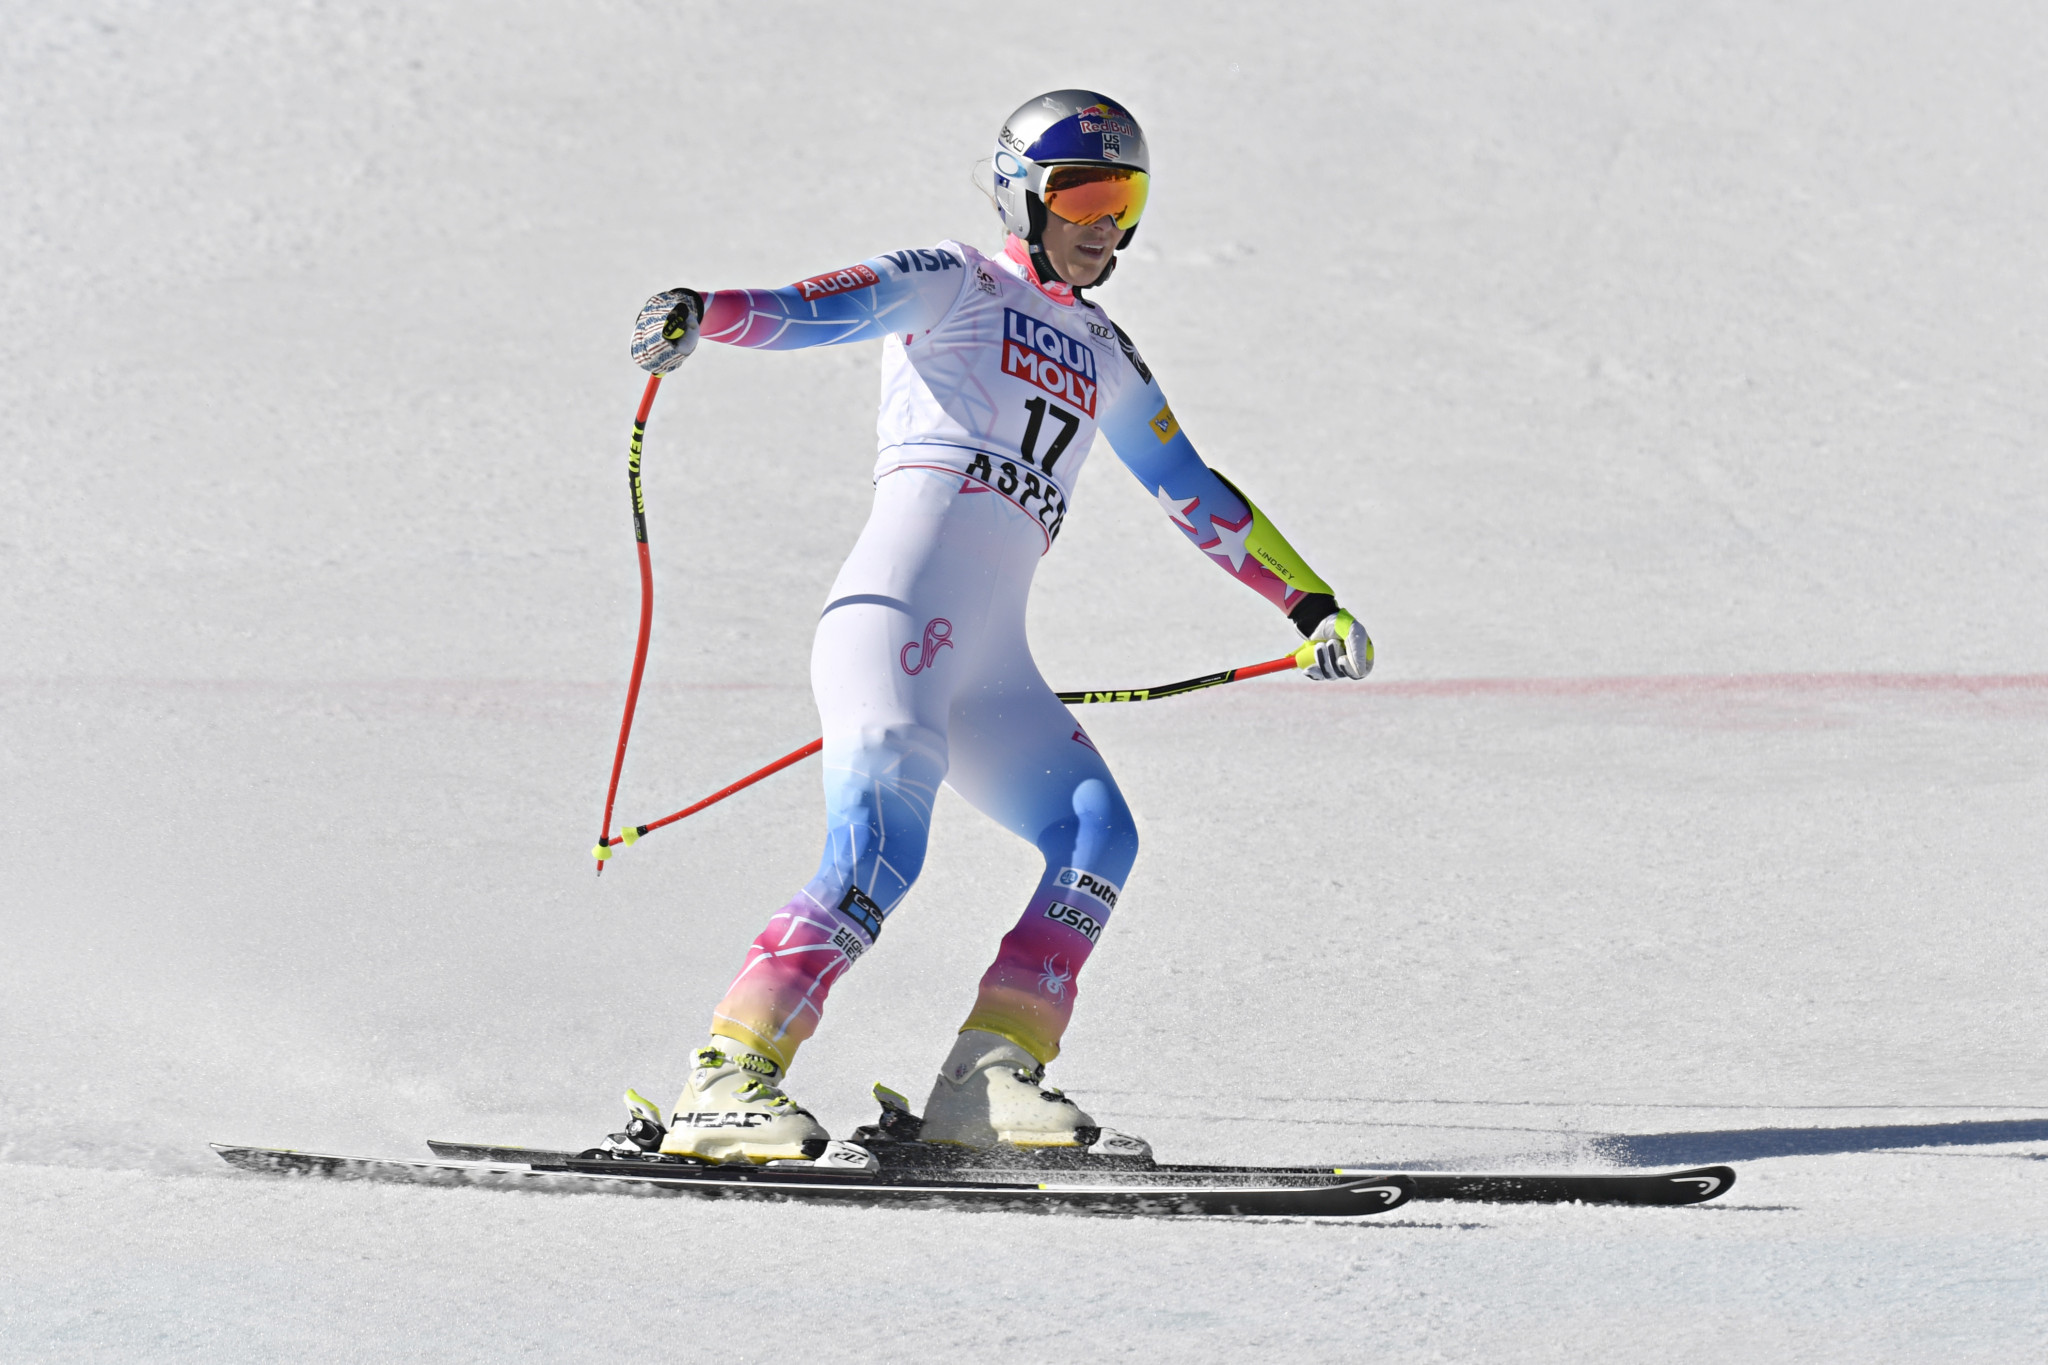 Lindsey Vonn says she does not see why she cannot compete against men ©Getty Images